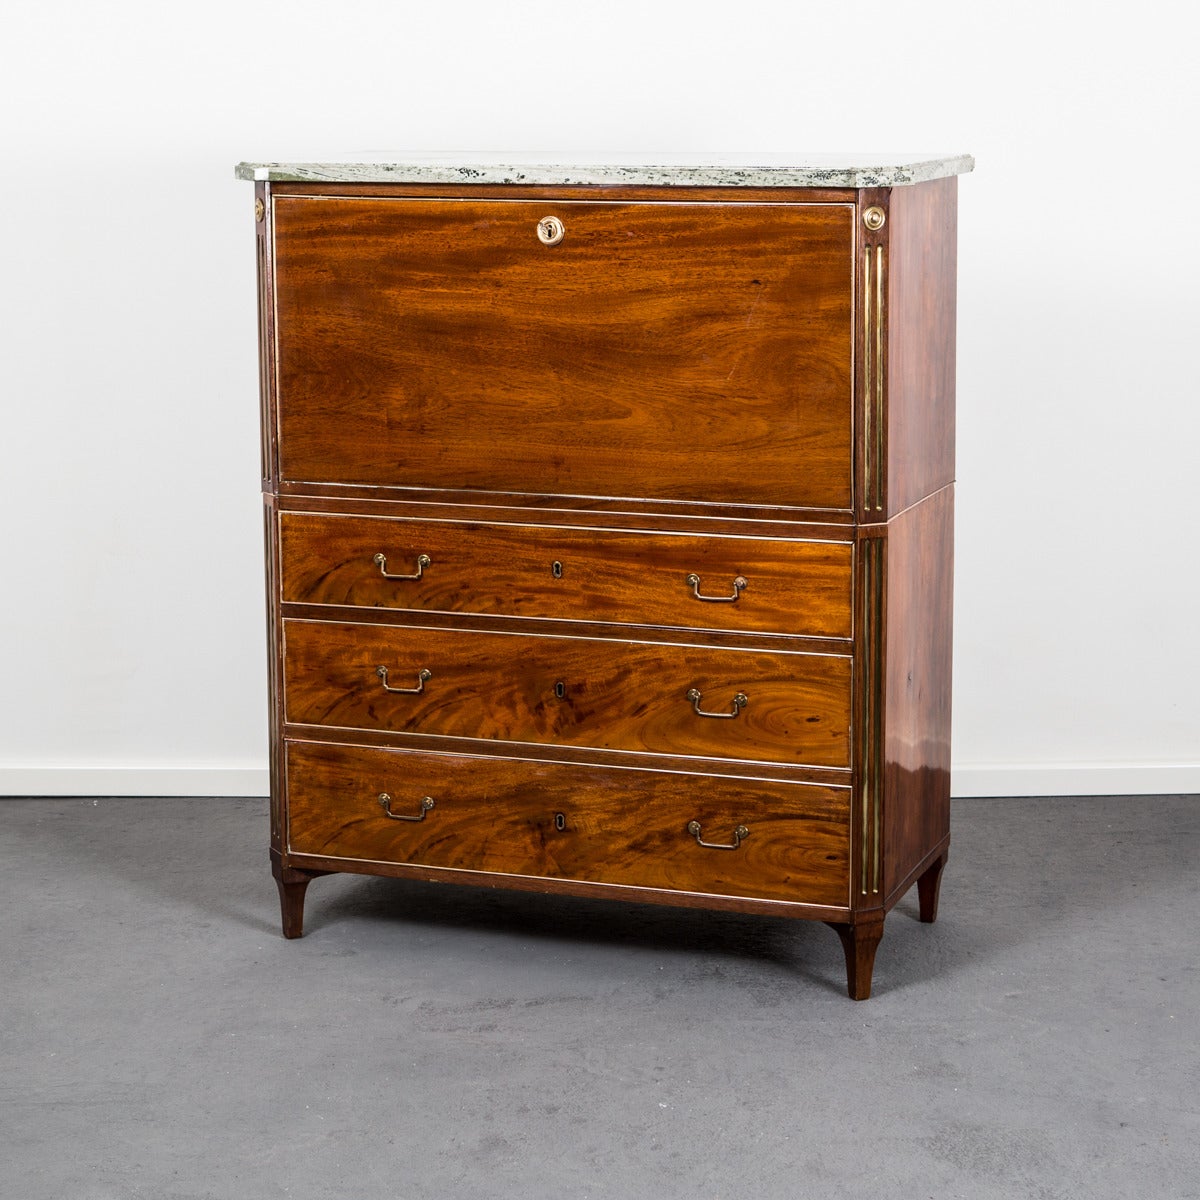 A beautiful mahogany secretary made in Sweden during the late part of the Gustavian period ca 1790-1810. The secretary is veneered with mahogany and decorated with simple brass details and hardware. Interior with several drawers and compartments.